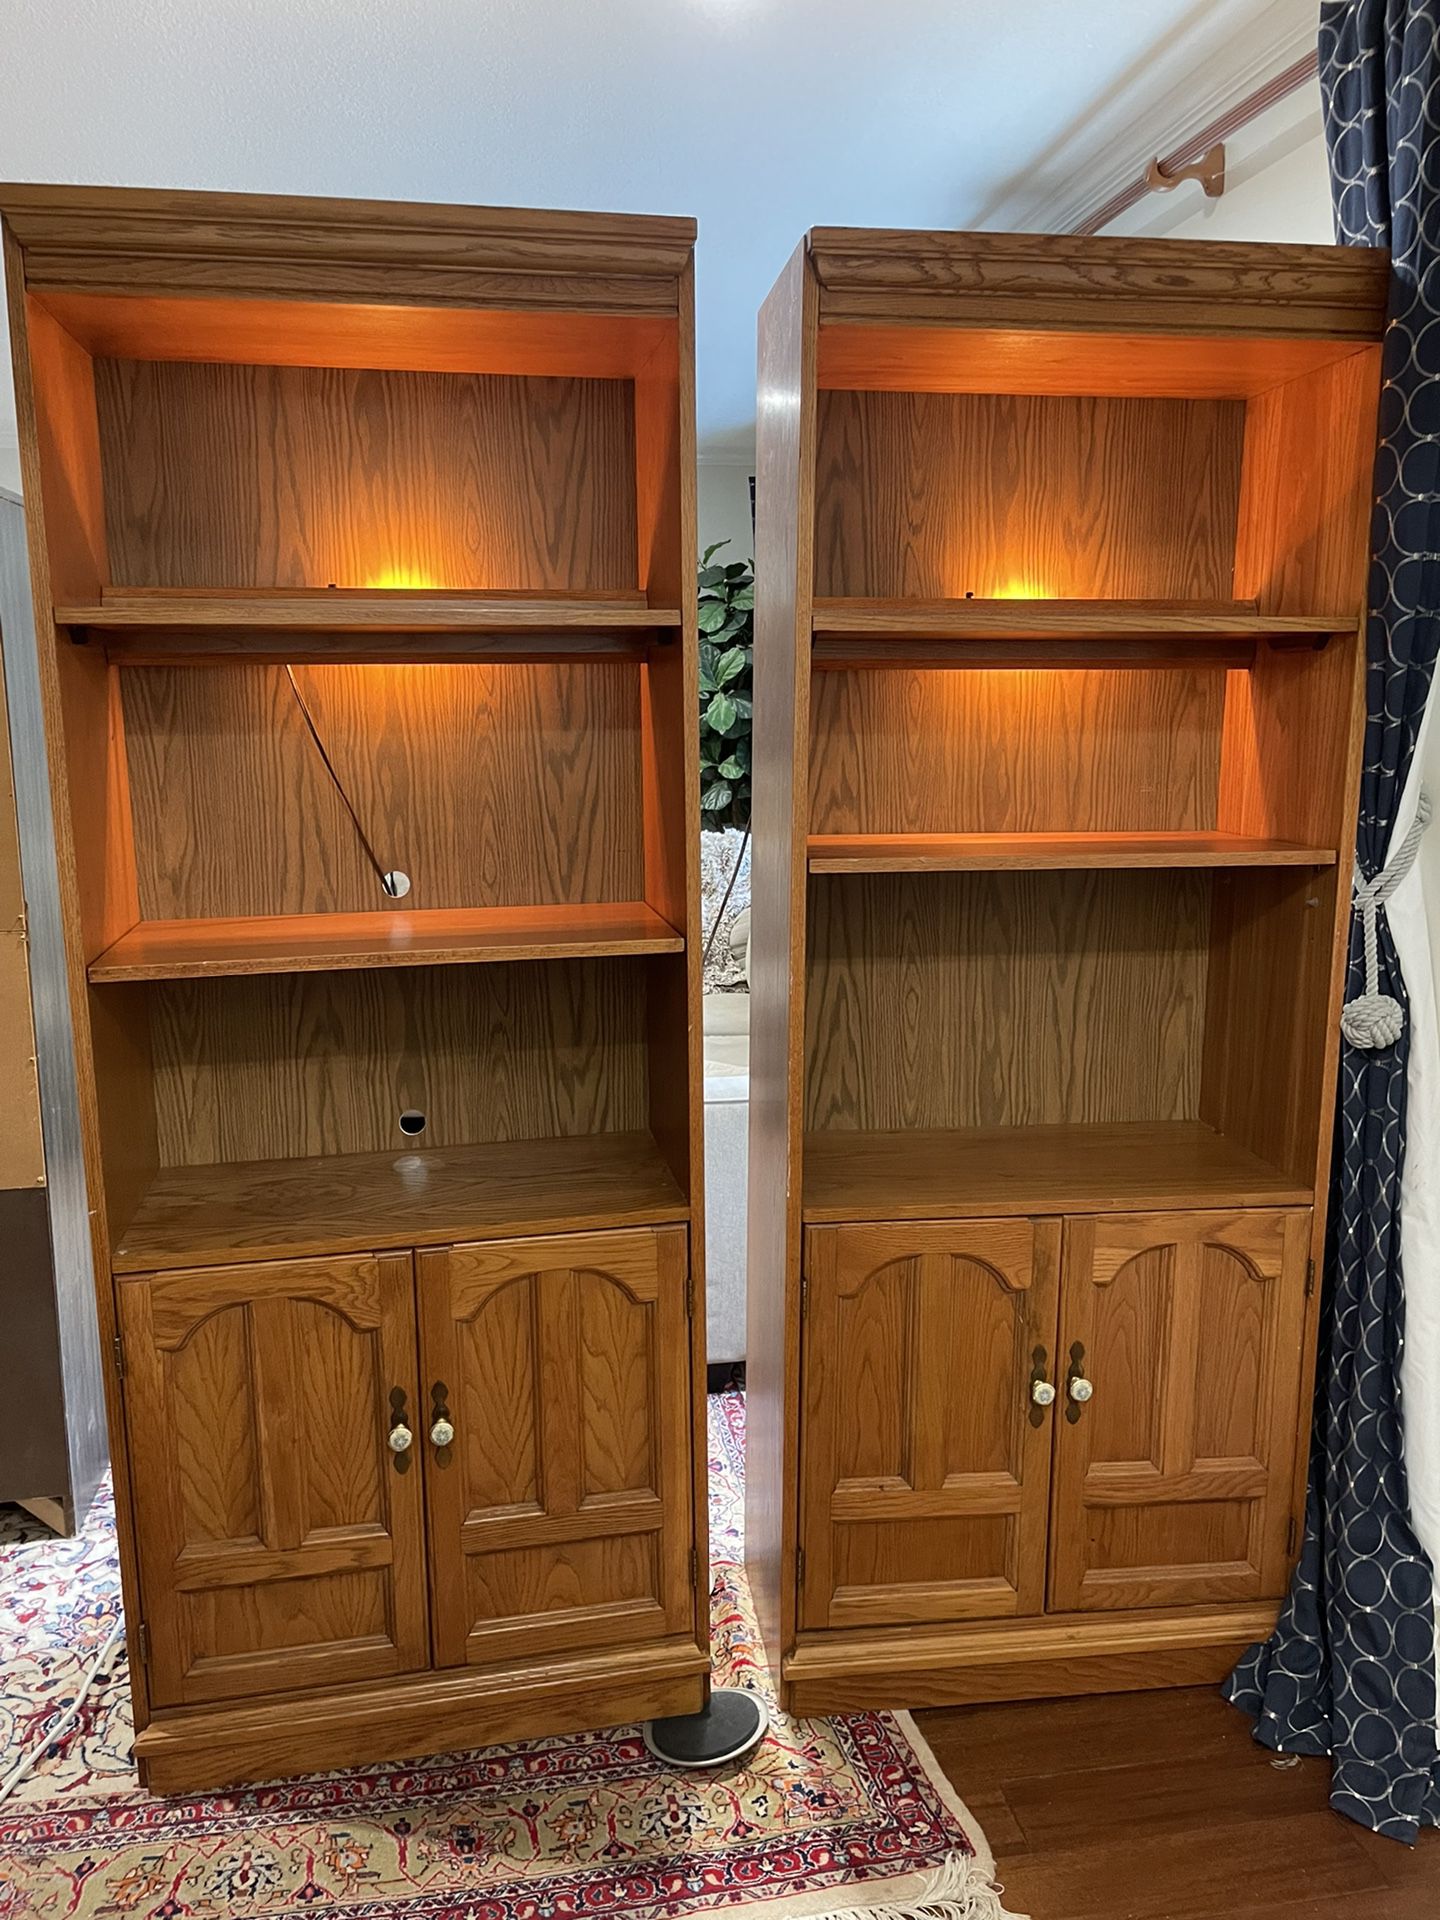 2 lighted shelving cabinet hutch units